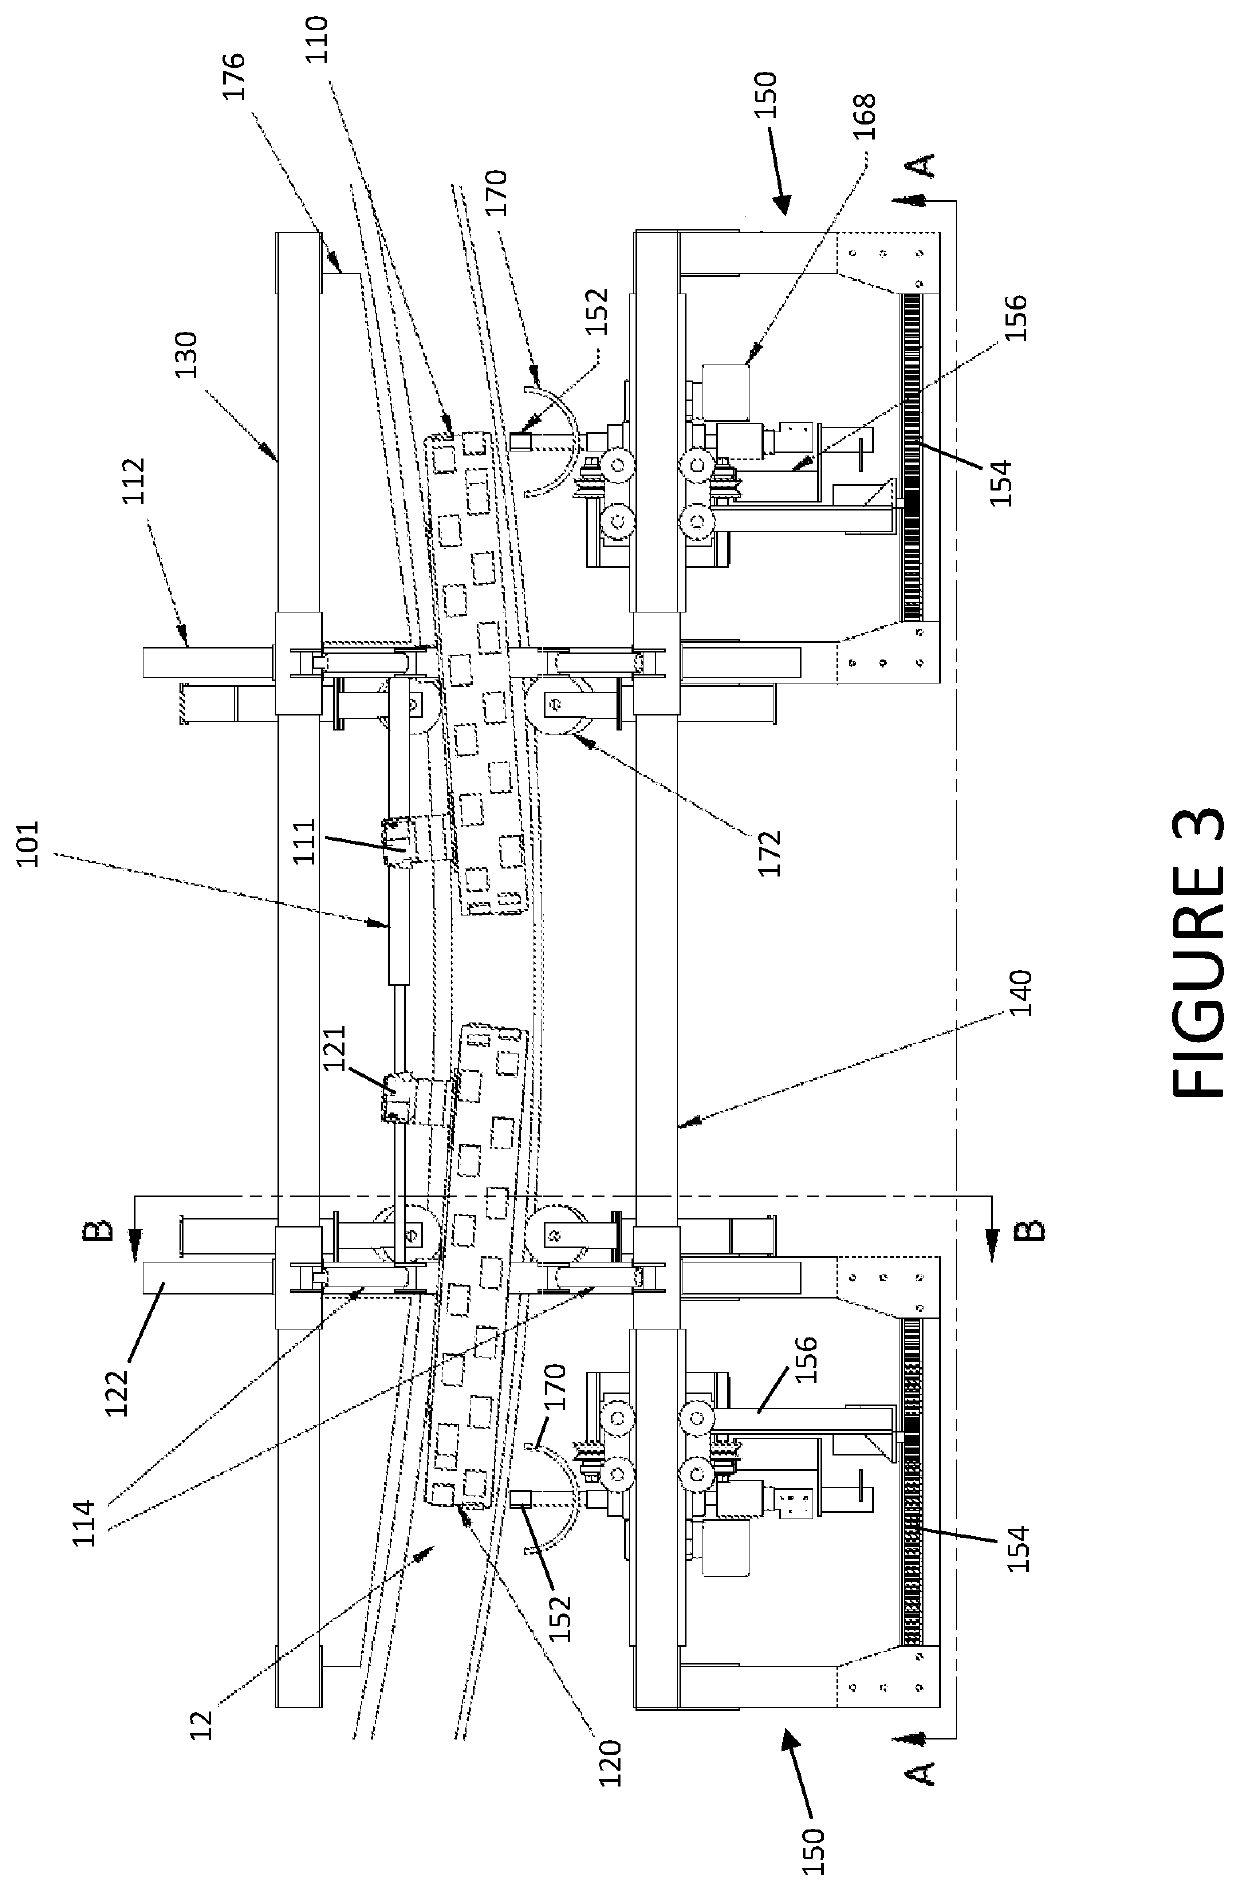 System and method for hydro-demolition of concrete structures